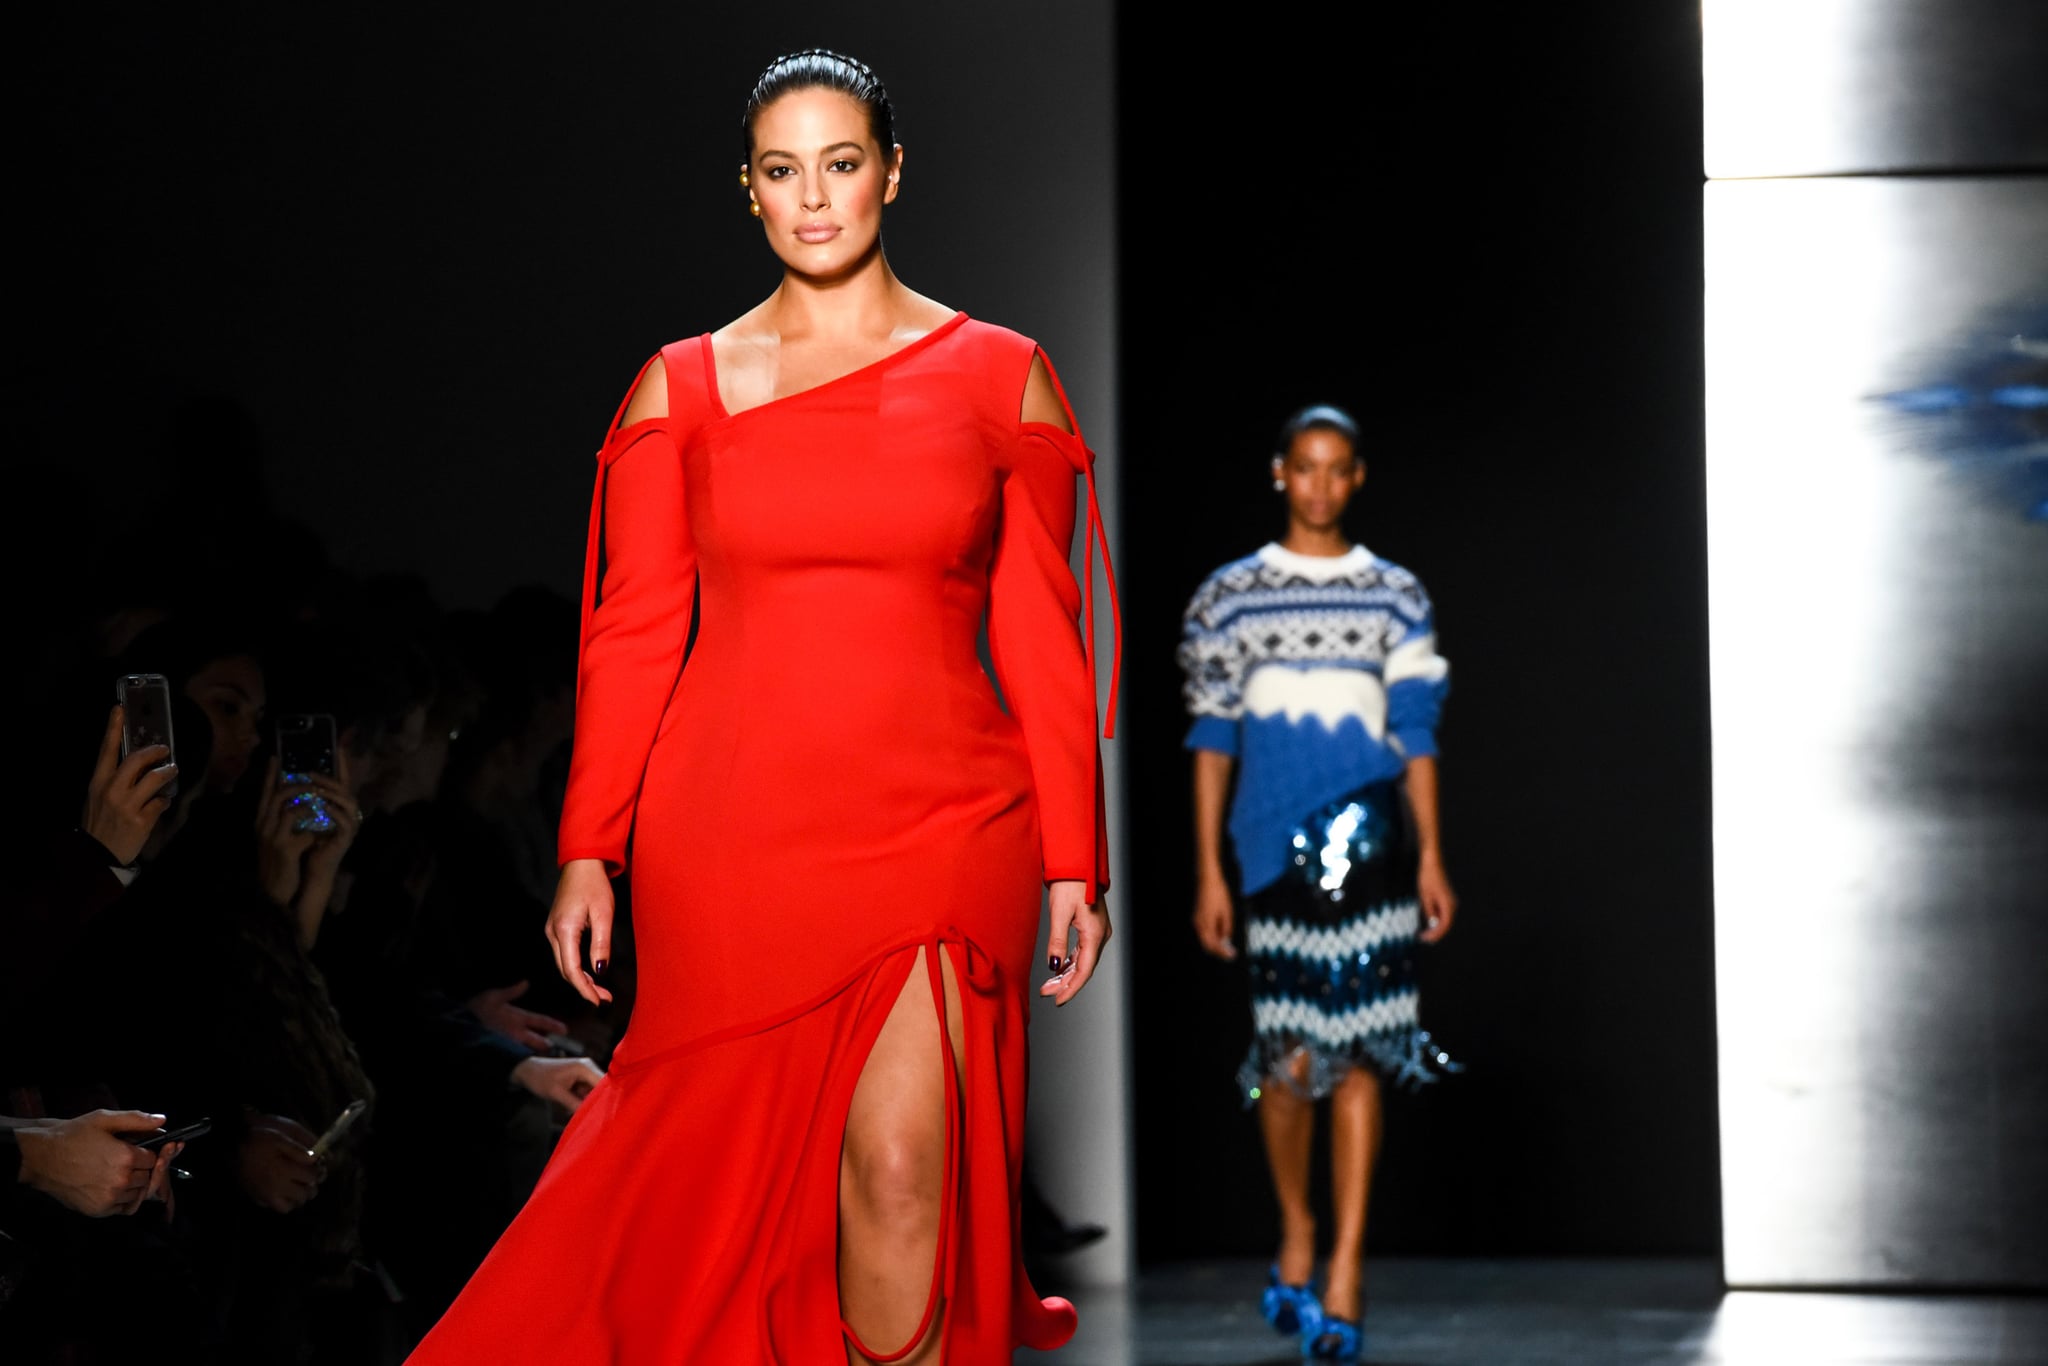 NEW YORK, NY - FEBRUARY 11:  Ashley Graham walks the runway at Prabal Gurung - Runway - February 2018 - New York Fashion Week: at Spring Studios on February 11, 2018 in New York City.  (Photo by Presley Ann/Patrick McMullan via Getty Images)